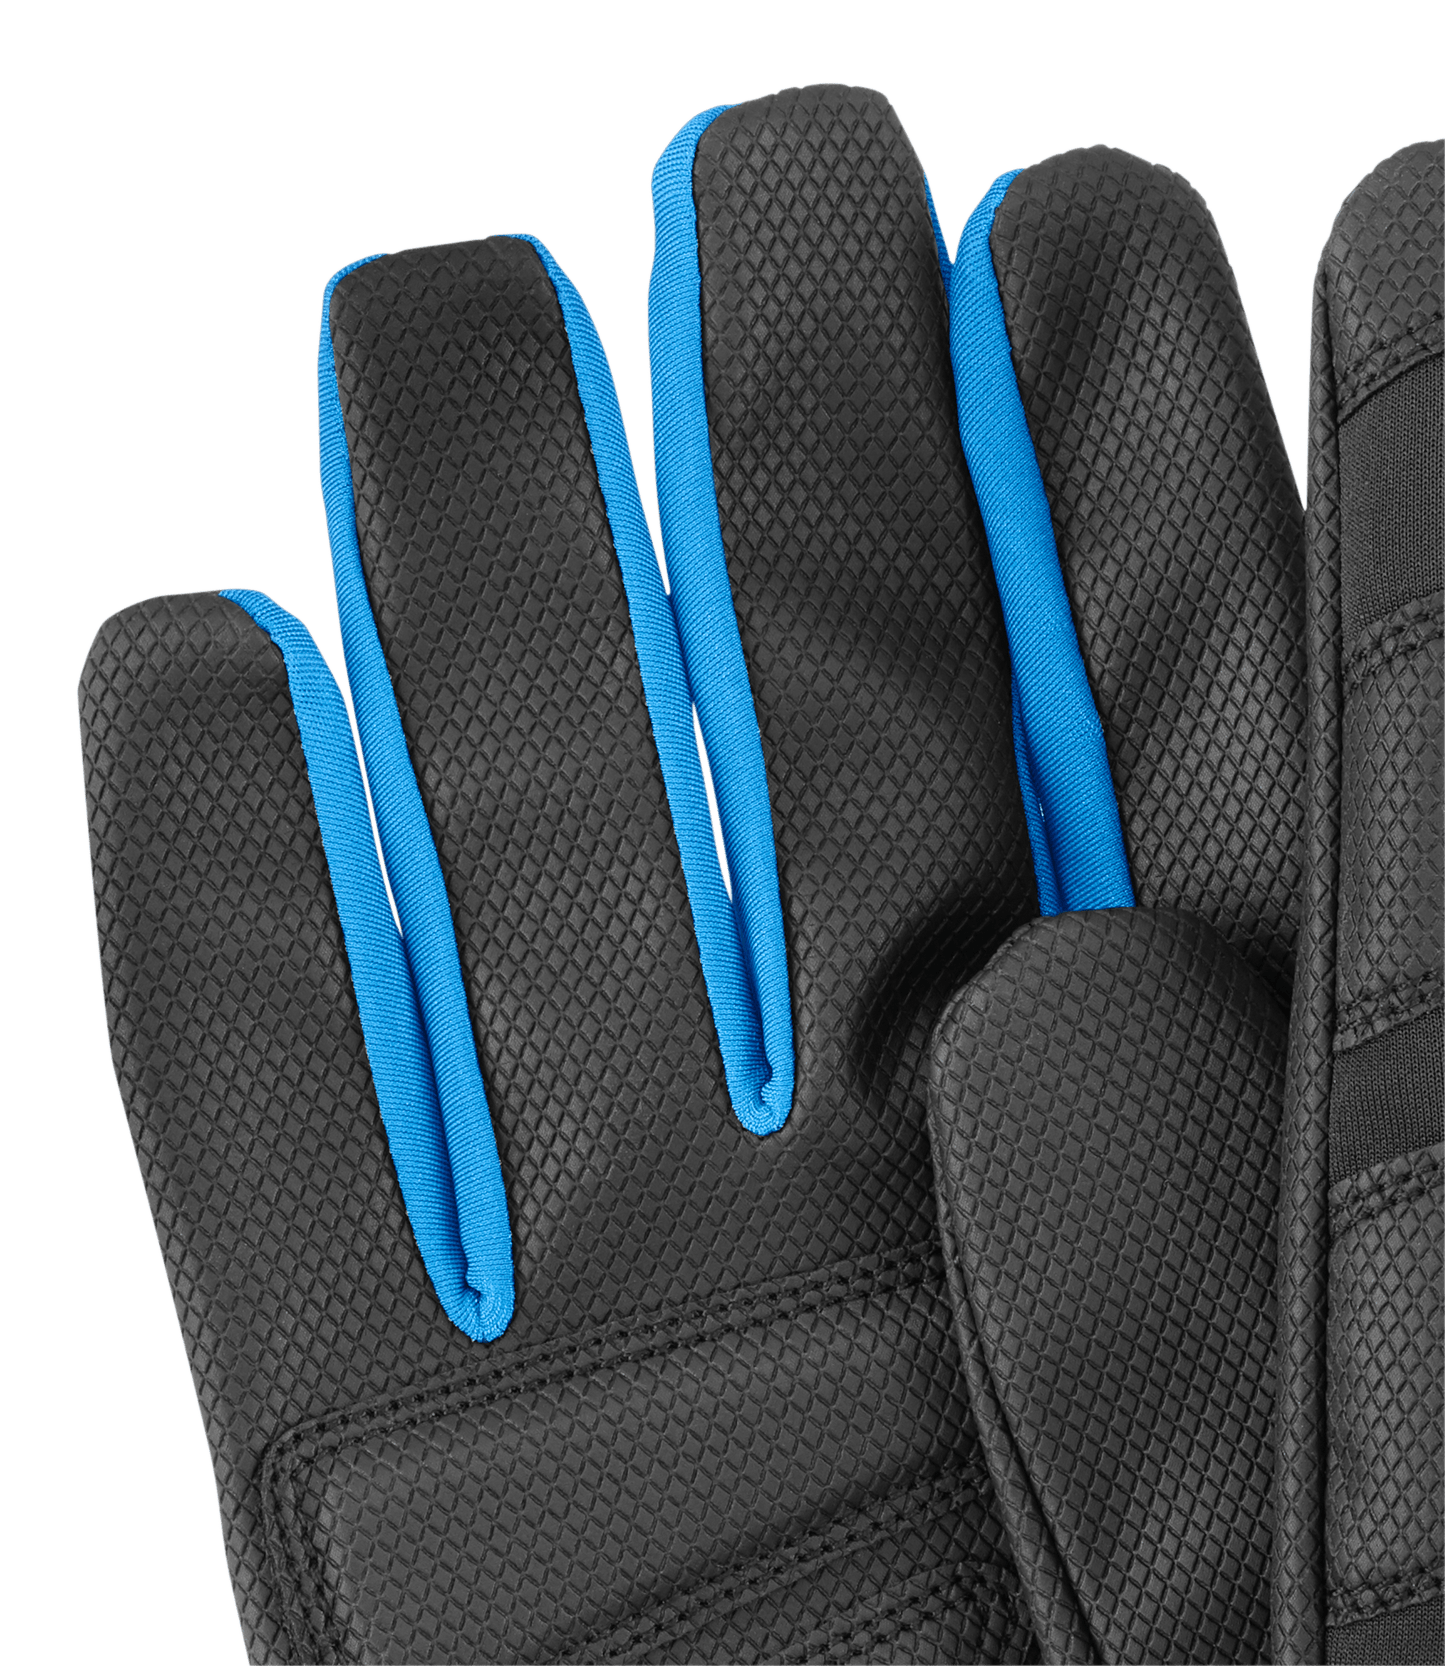 Performance Fit Gloves - Extra Large